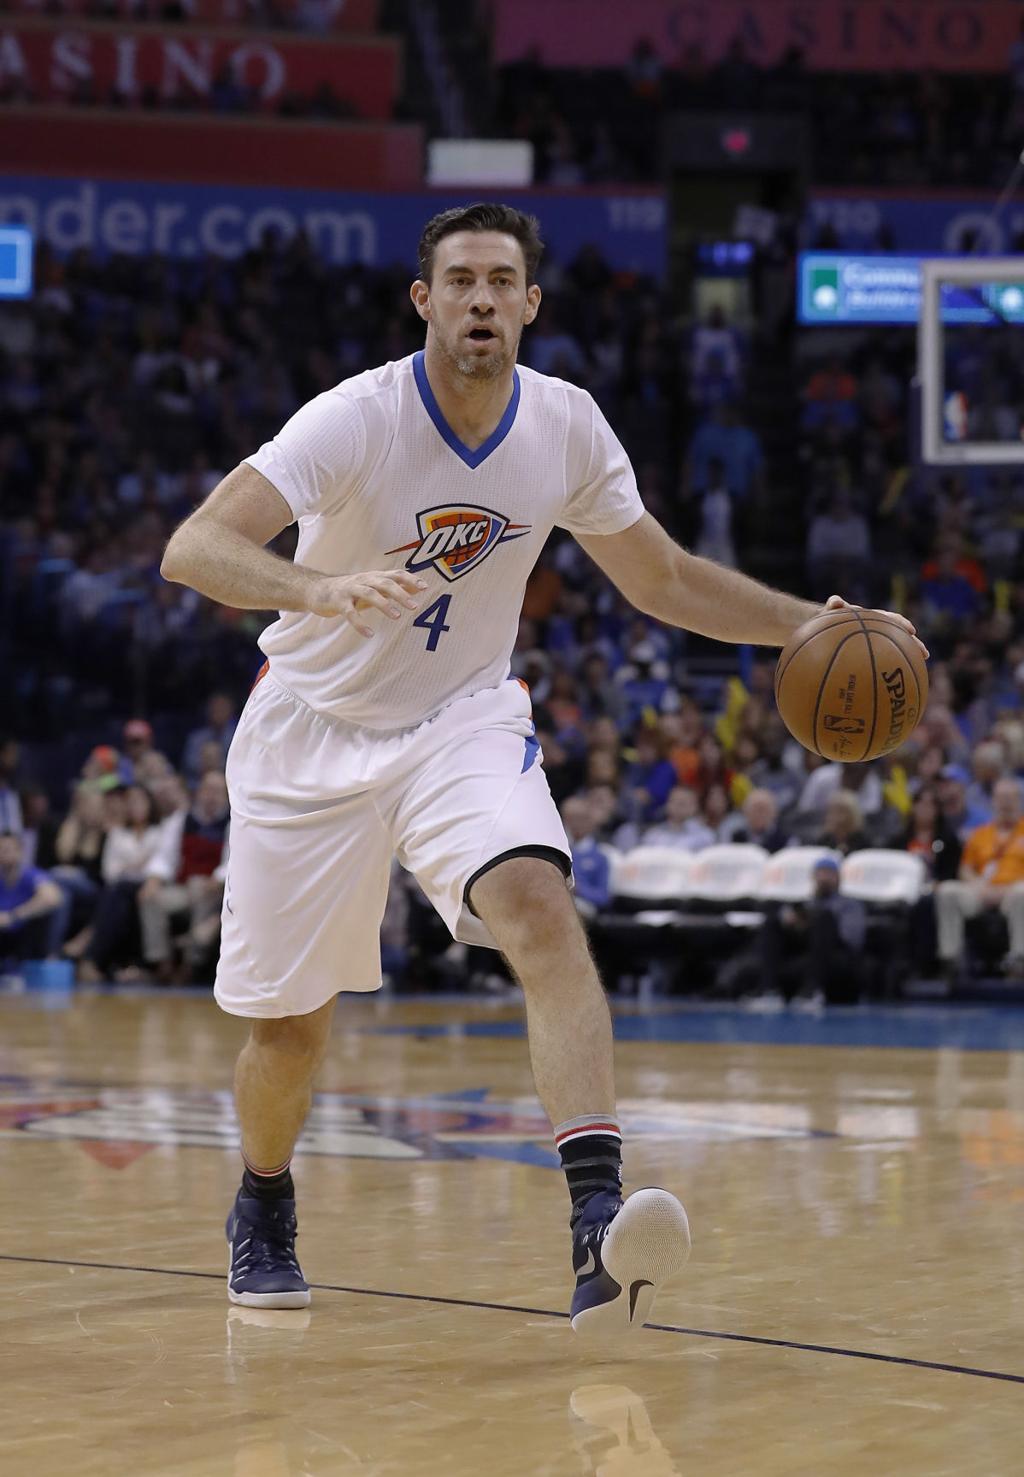 Mr. Thunder' Nick Collison retires from the NBA after 15 seasons